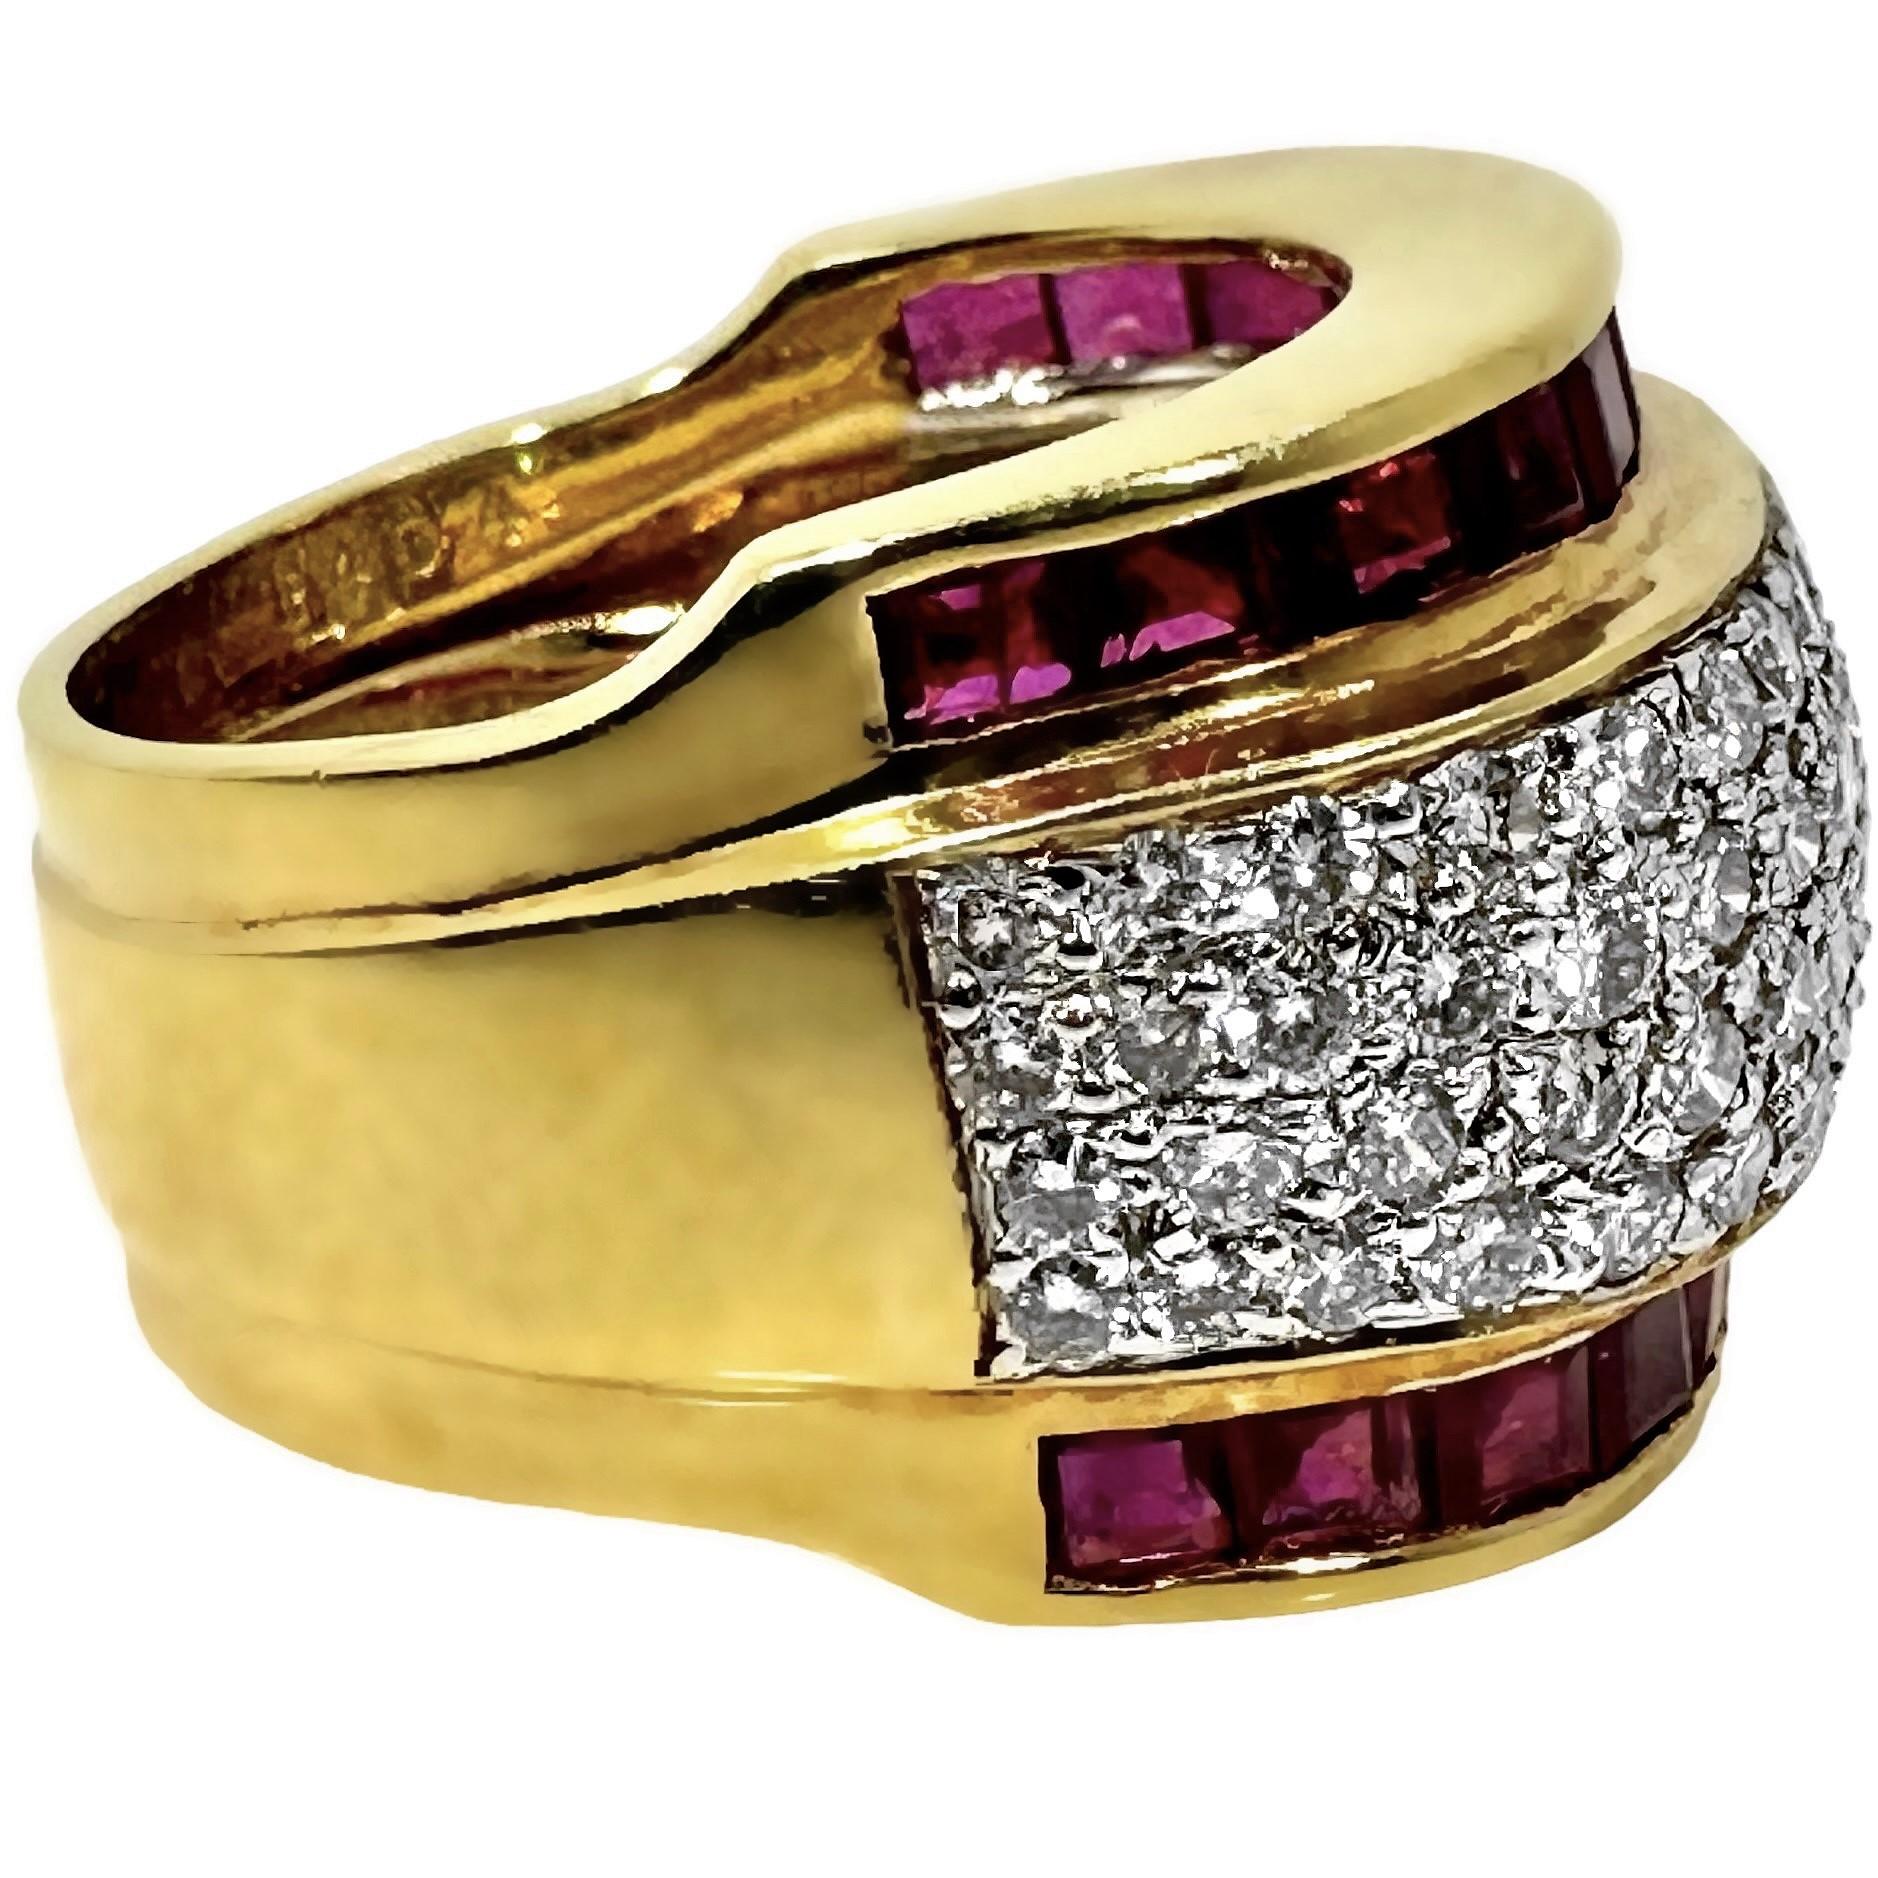 Women's Wide and Tailored 18k Gold Band Ring with Diamonds and Vivid Rubies For Sale